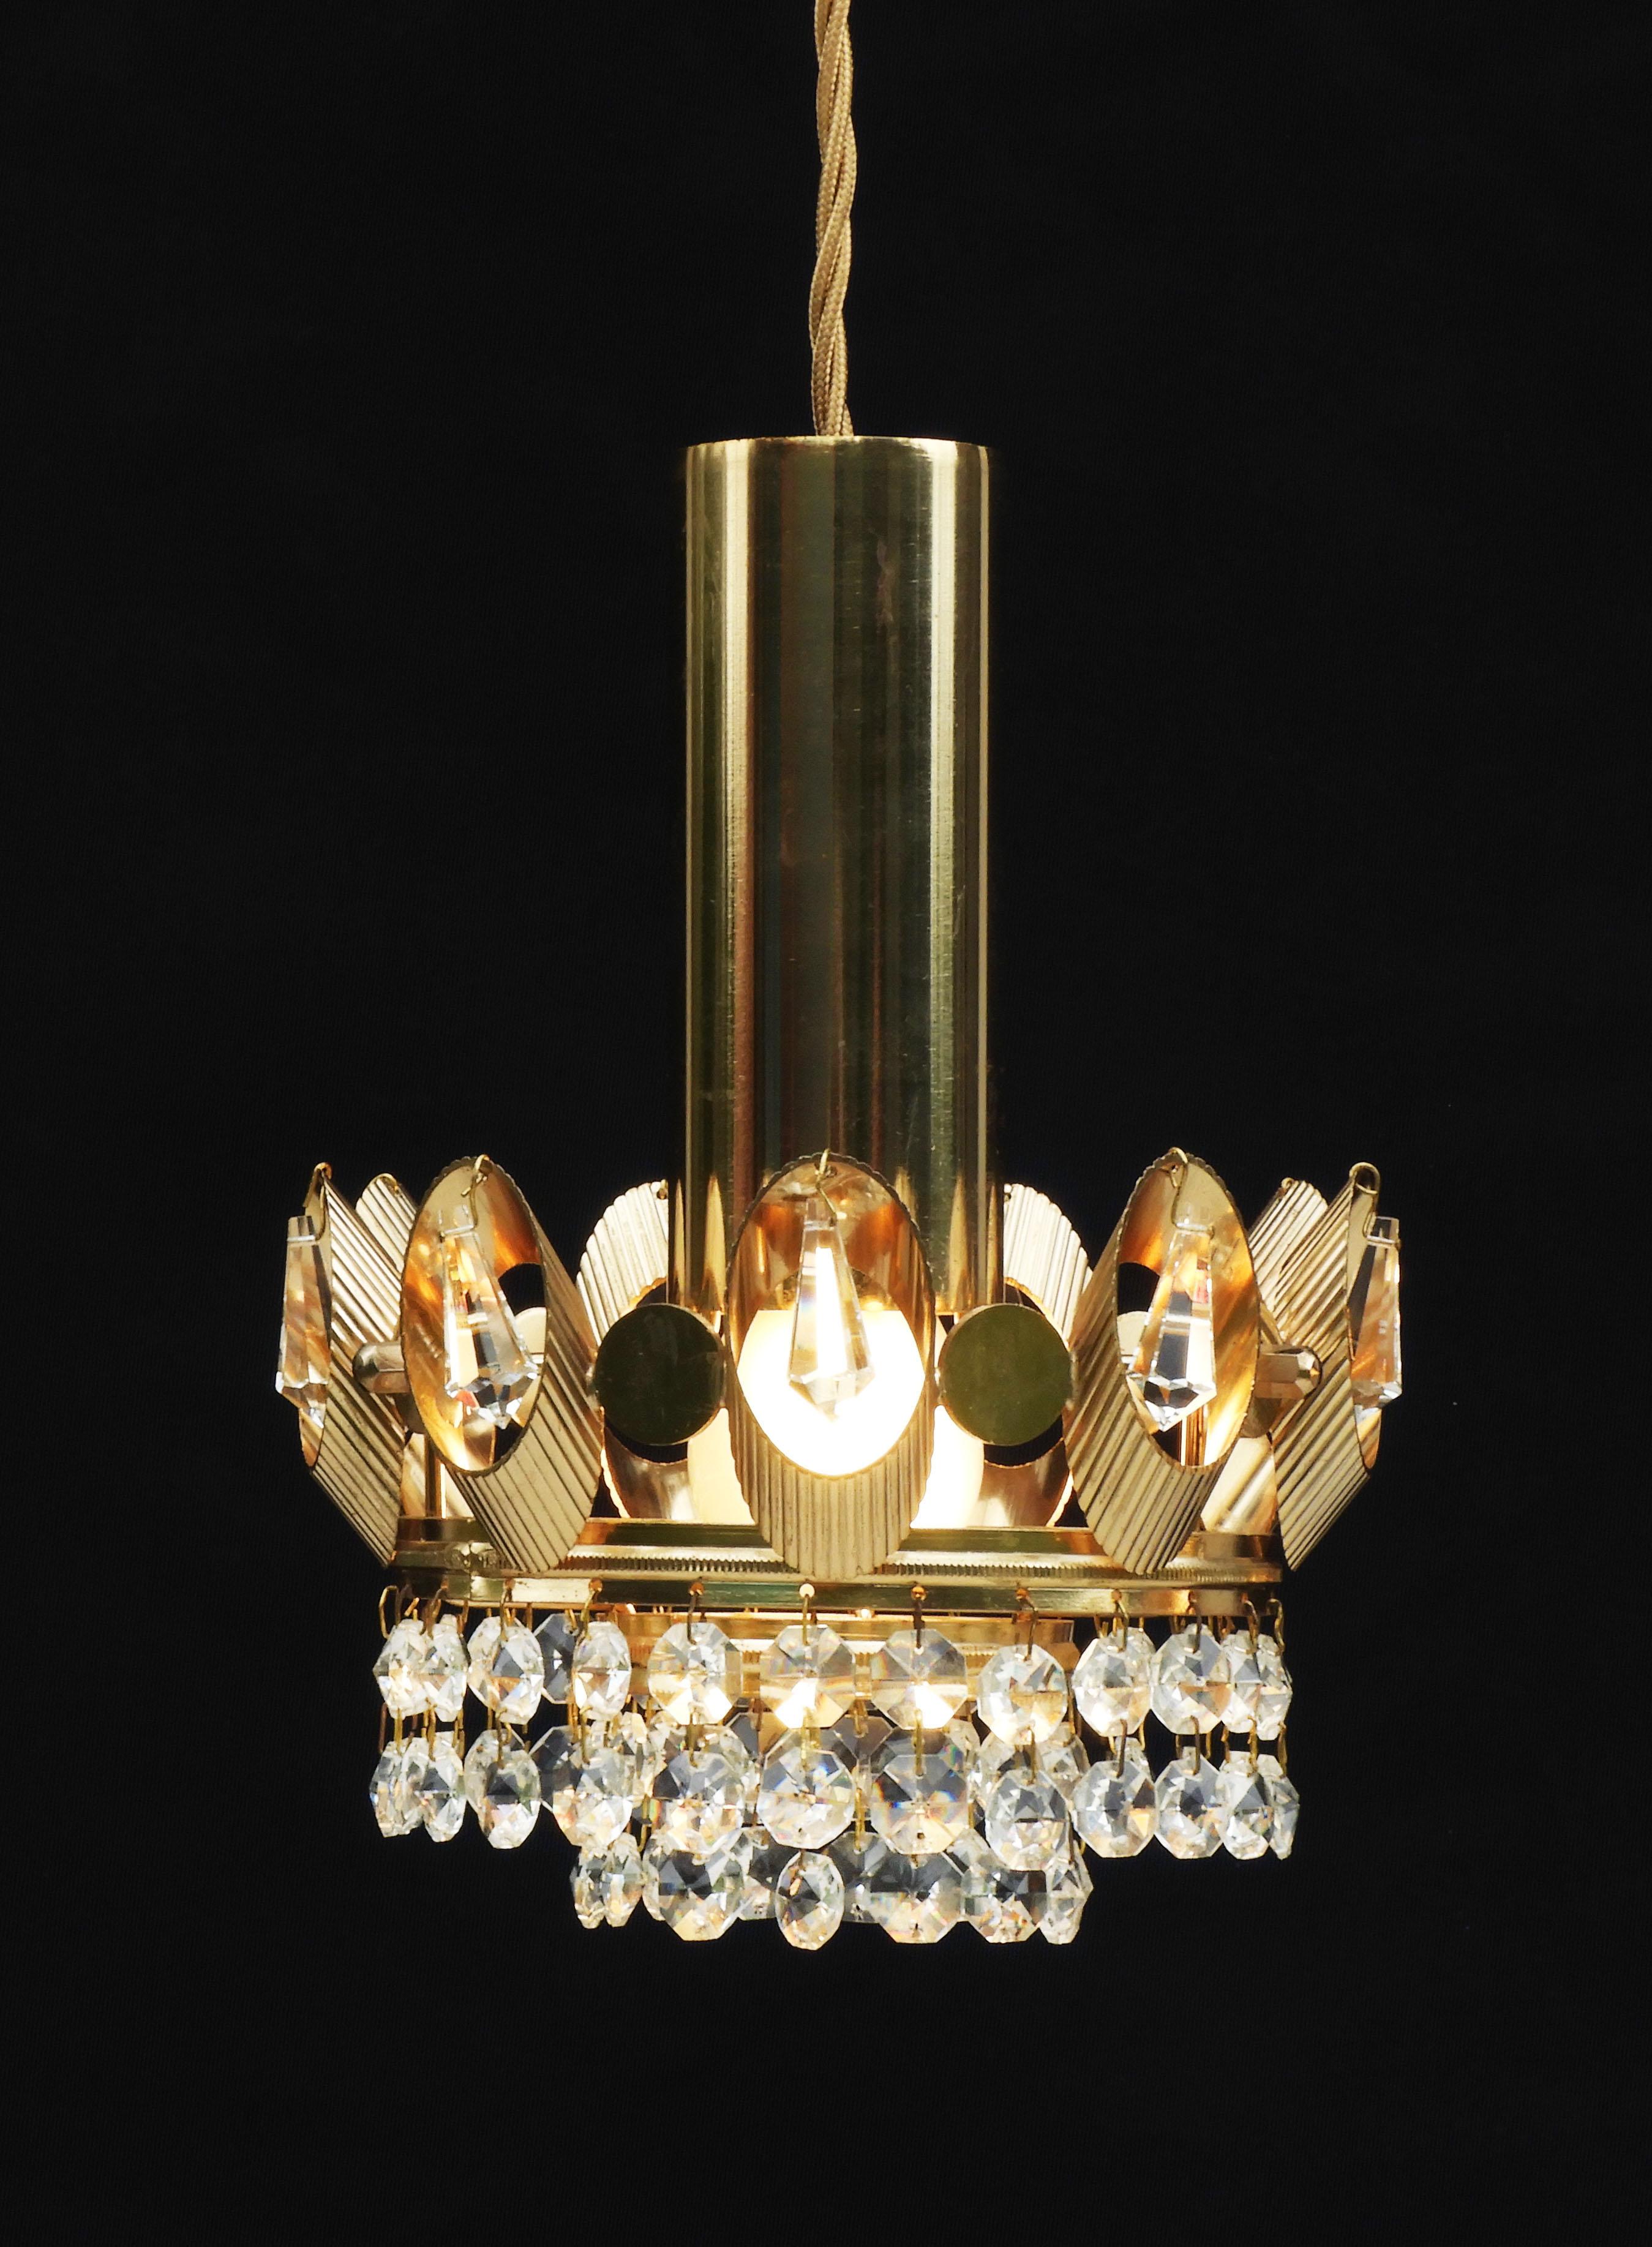 Palwa pendant light chandeliers circa 1970s Germany.
Two tiers of octagonal crystals, crowned with a gilded ring of serrated ovals each with a faceted crystal cut drop.
Stylish and versatile these pendant lights can be hung individually or grouped